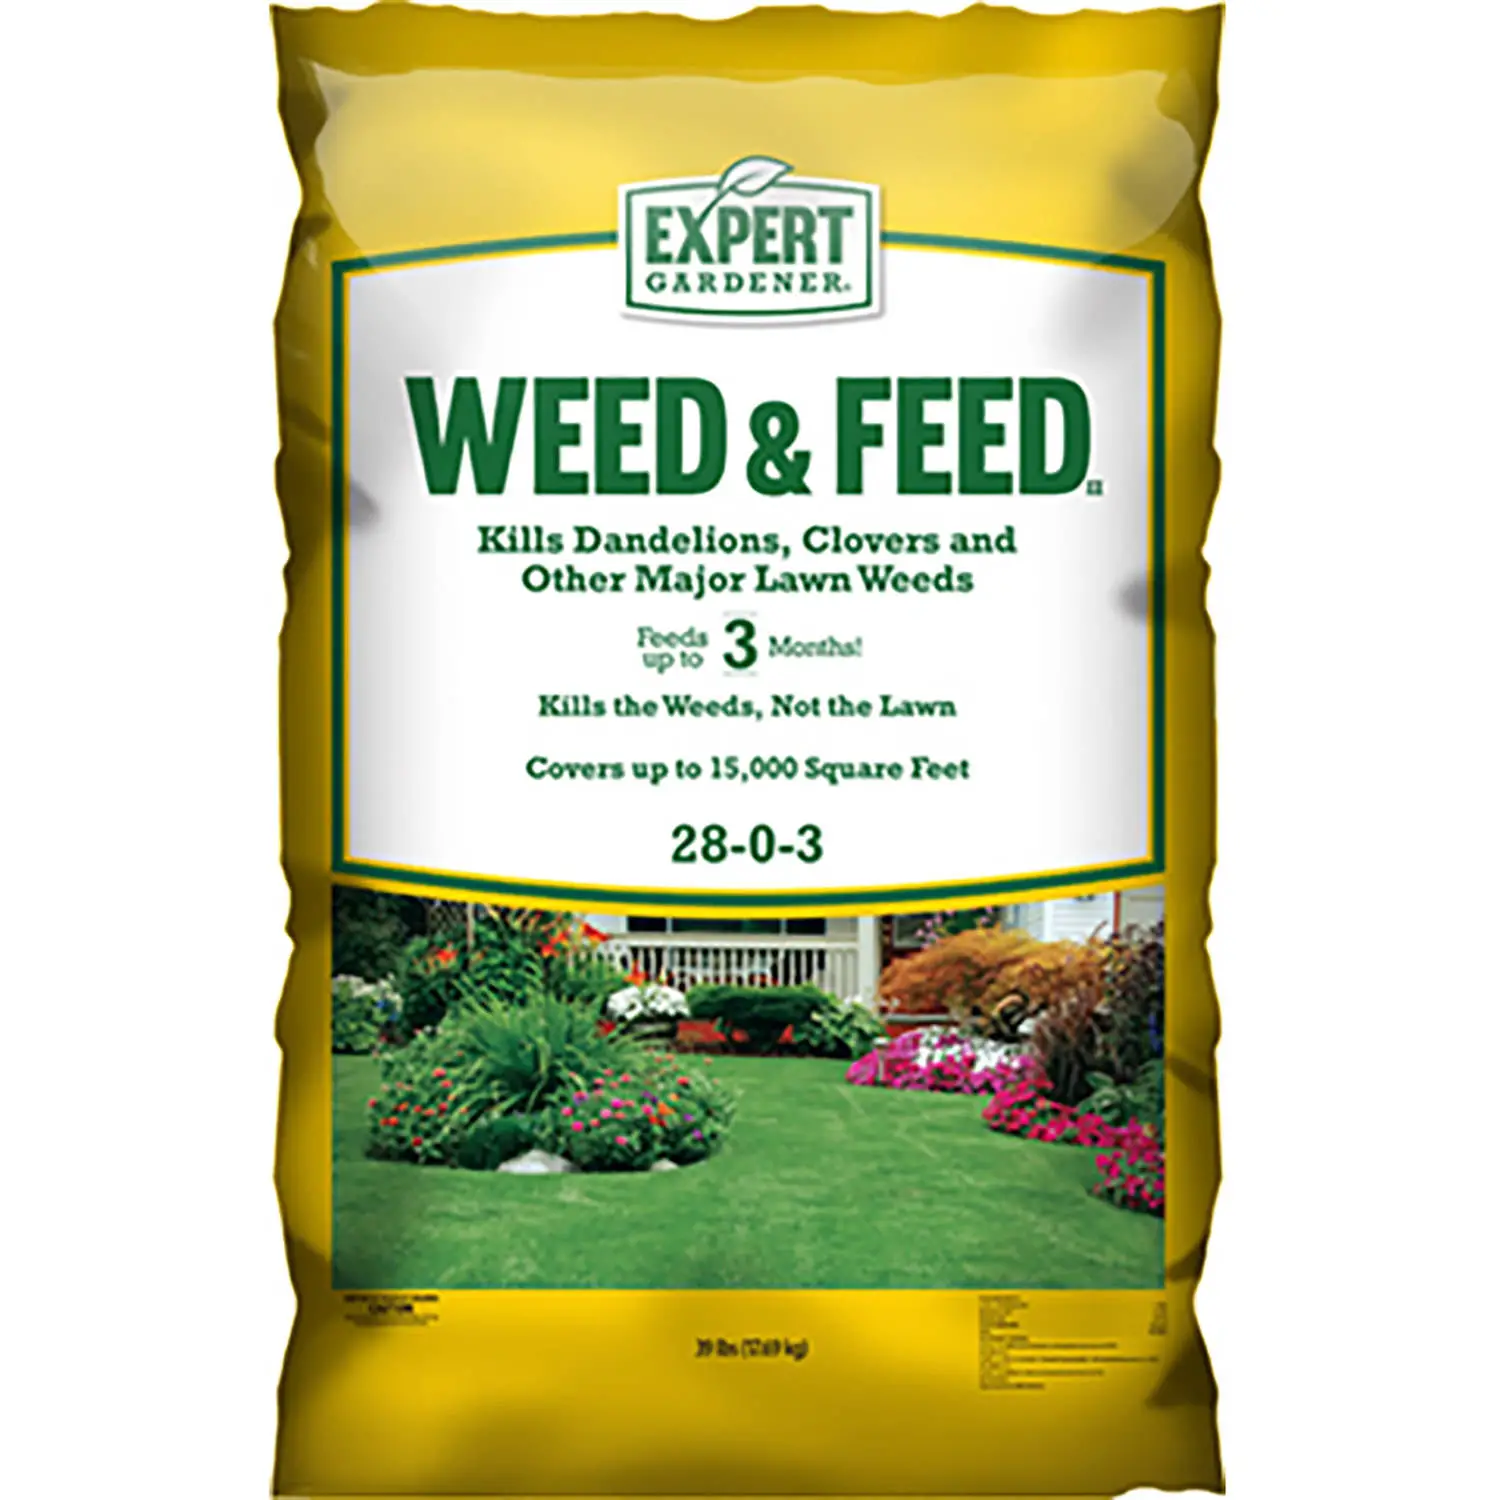 Expert Gardener 15,000 Square Feet Weed and Feed Lawn Fertilizer, 28